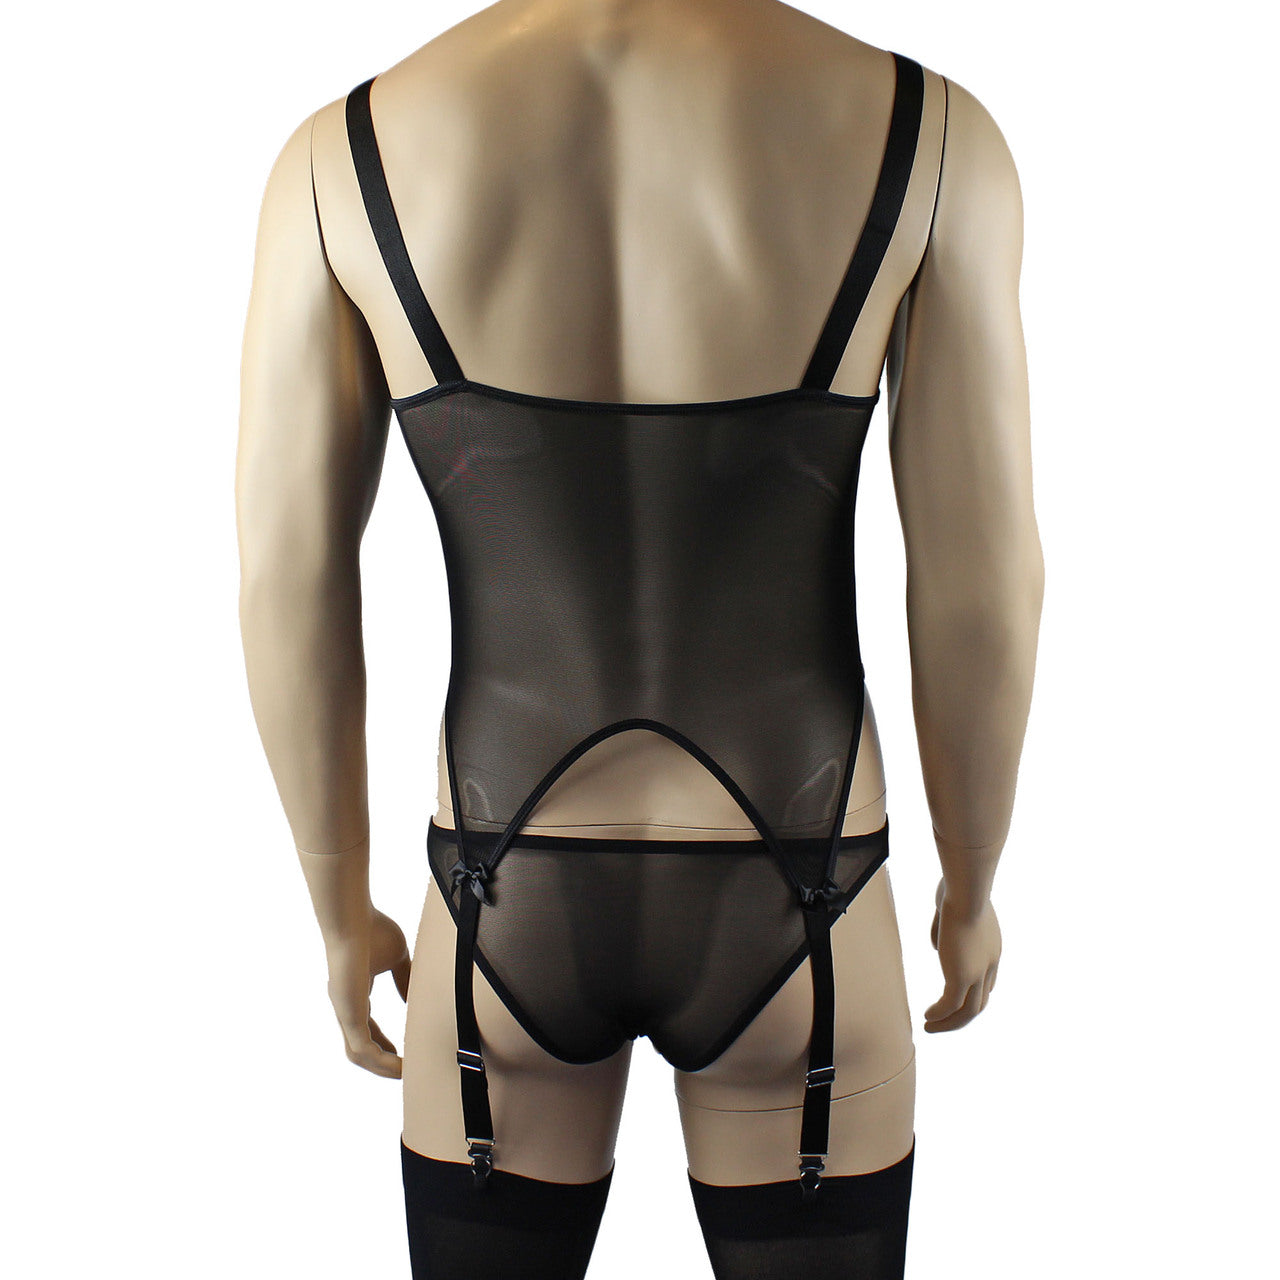 Mens Exotic Corset Top, Brief & Stockings - Sizes up to 3XL (black plus other colours)